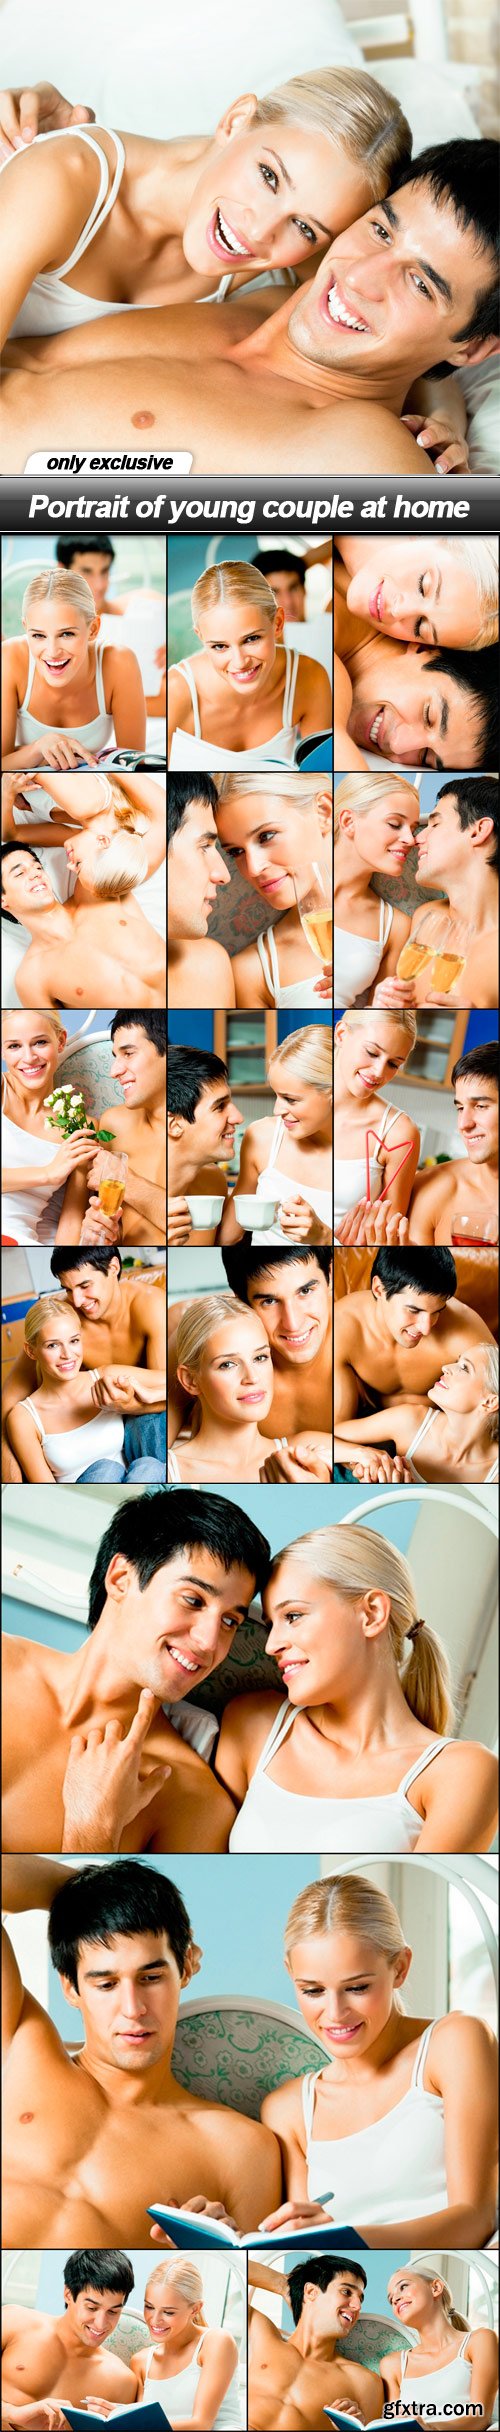 Portrait of young couple at home - 17 UHQ JPEG